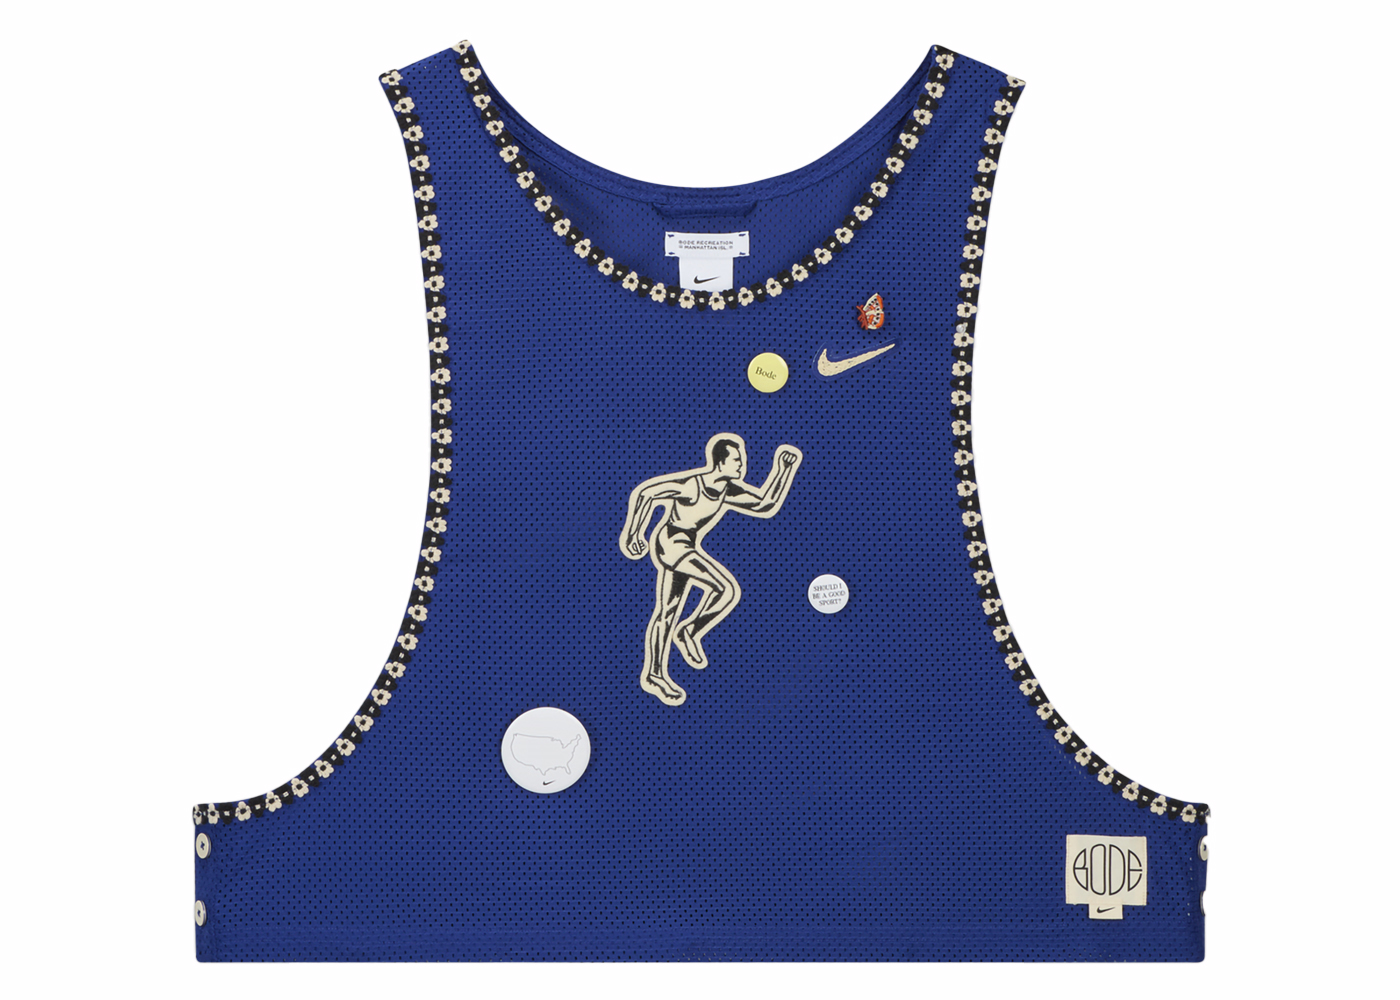 Nike x BODE Scrimmage Pinny Blue